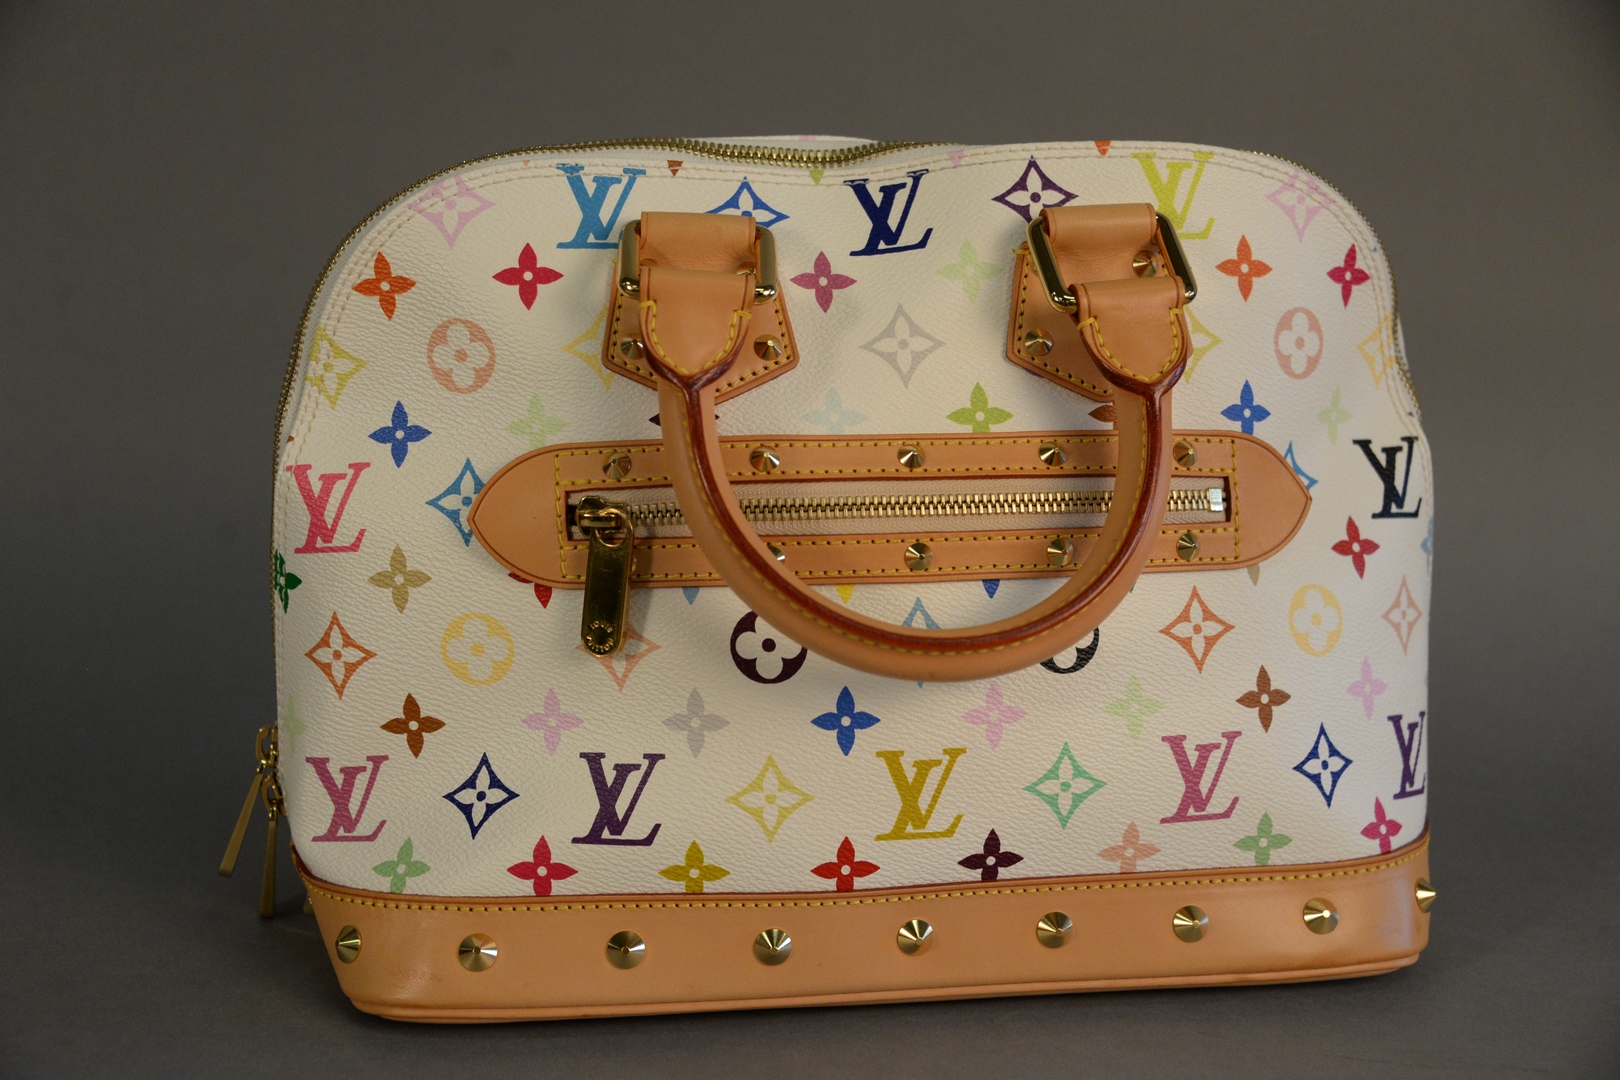 Louis Vuitton white monogrammed tote or handbag, red interior with leather  serial tag, FL0083, and dust bag, ht. 9, wd. 12, dp. 6.25. sold at  auction on 26th September